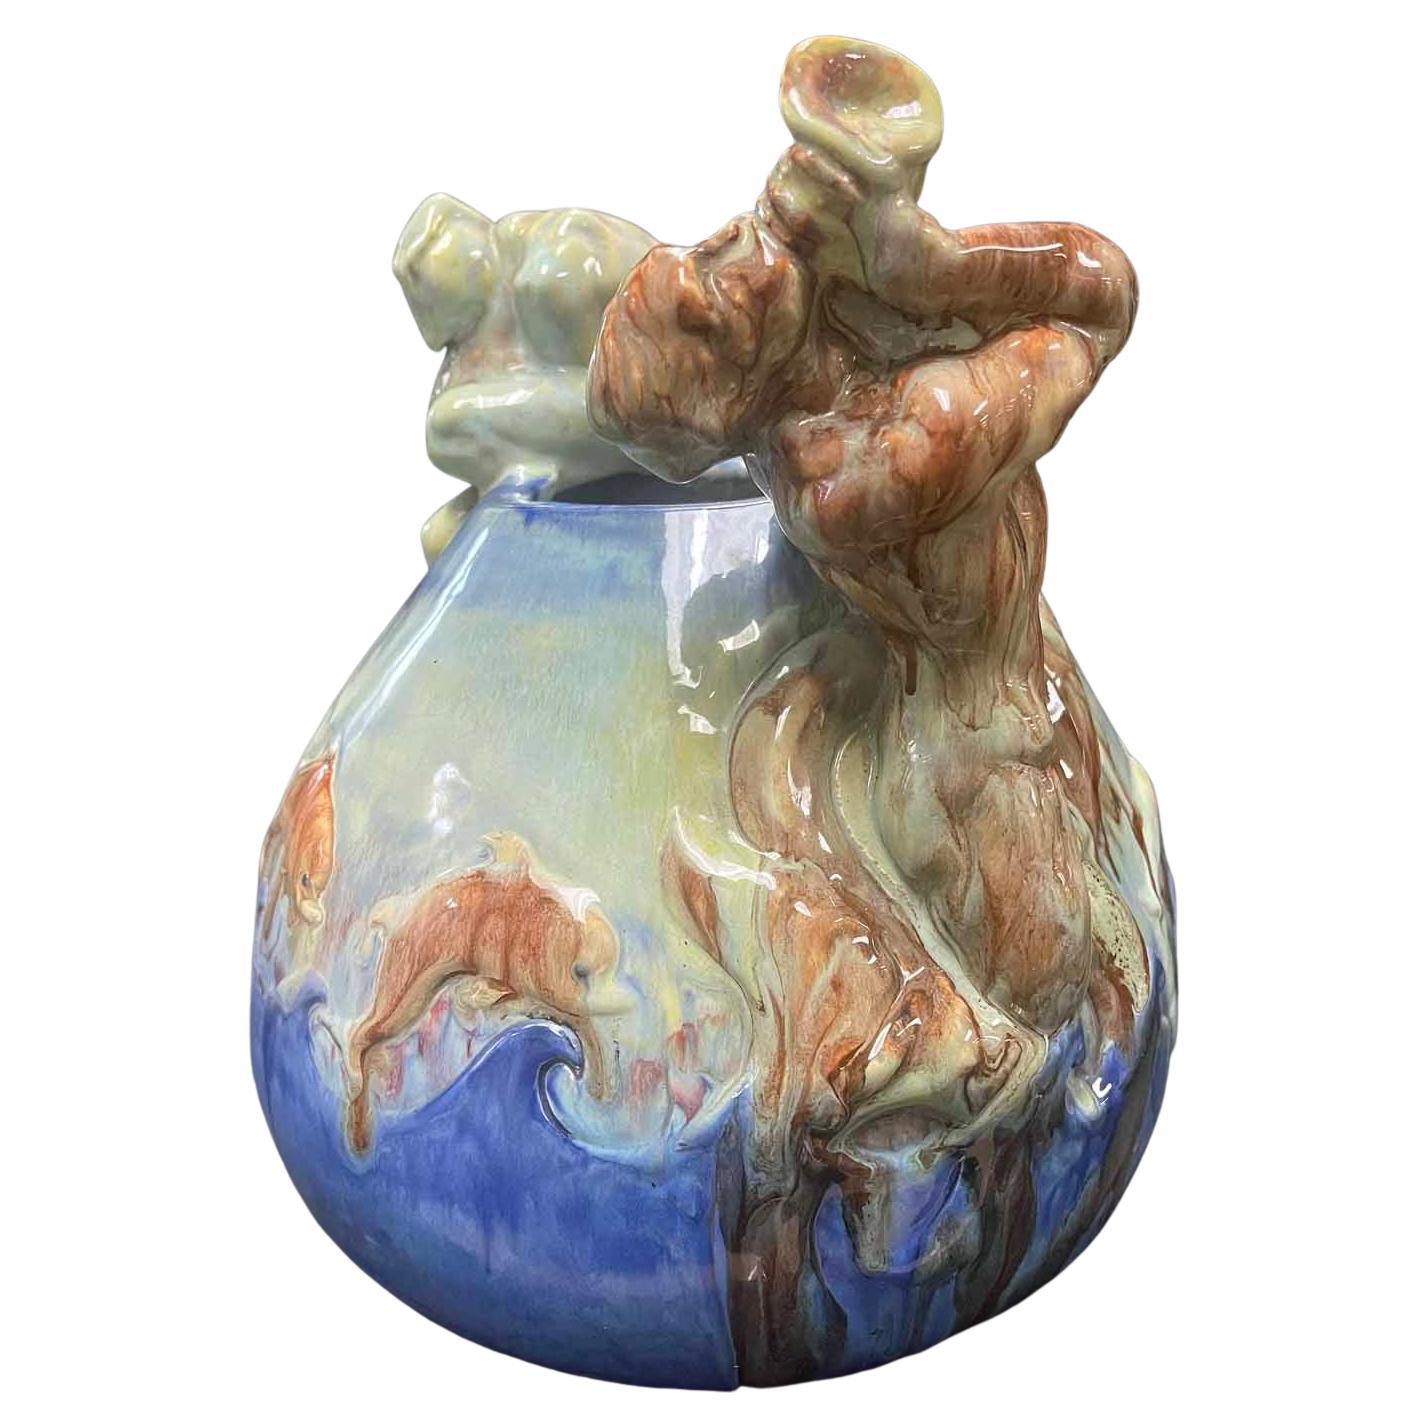 "Triton, Merman and Mermaid, " Sculptural Vase w/ Aquatic Motif and Nudes in Blue For Sale